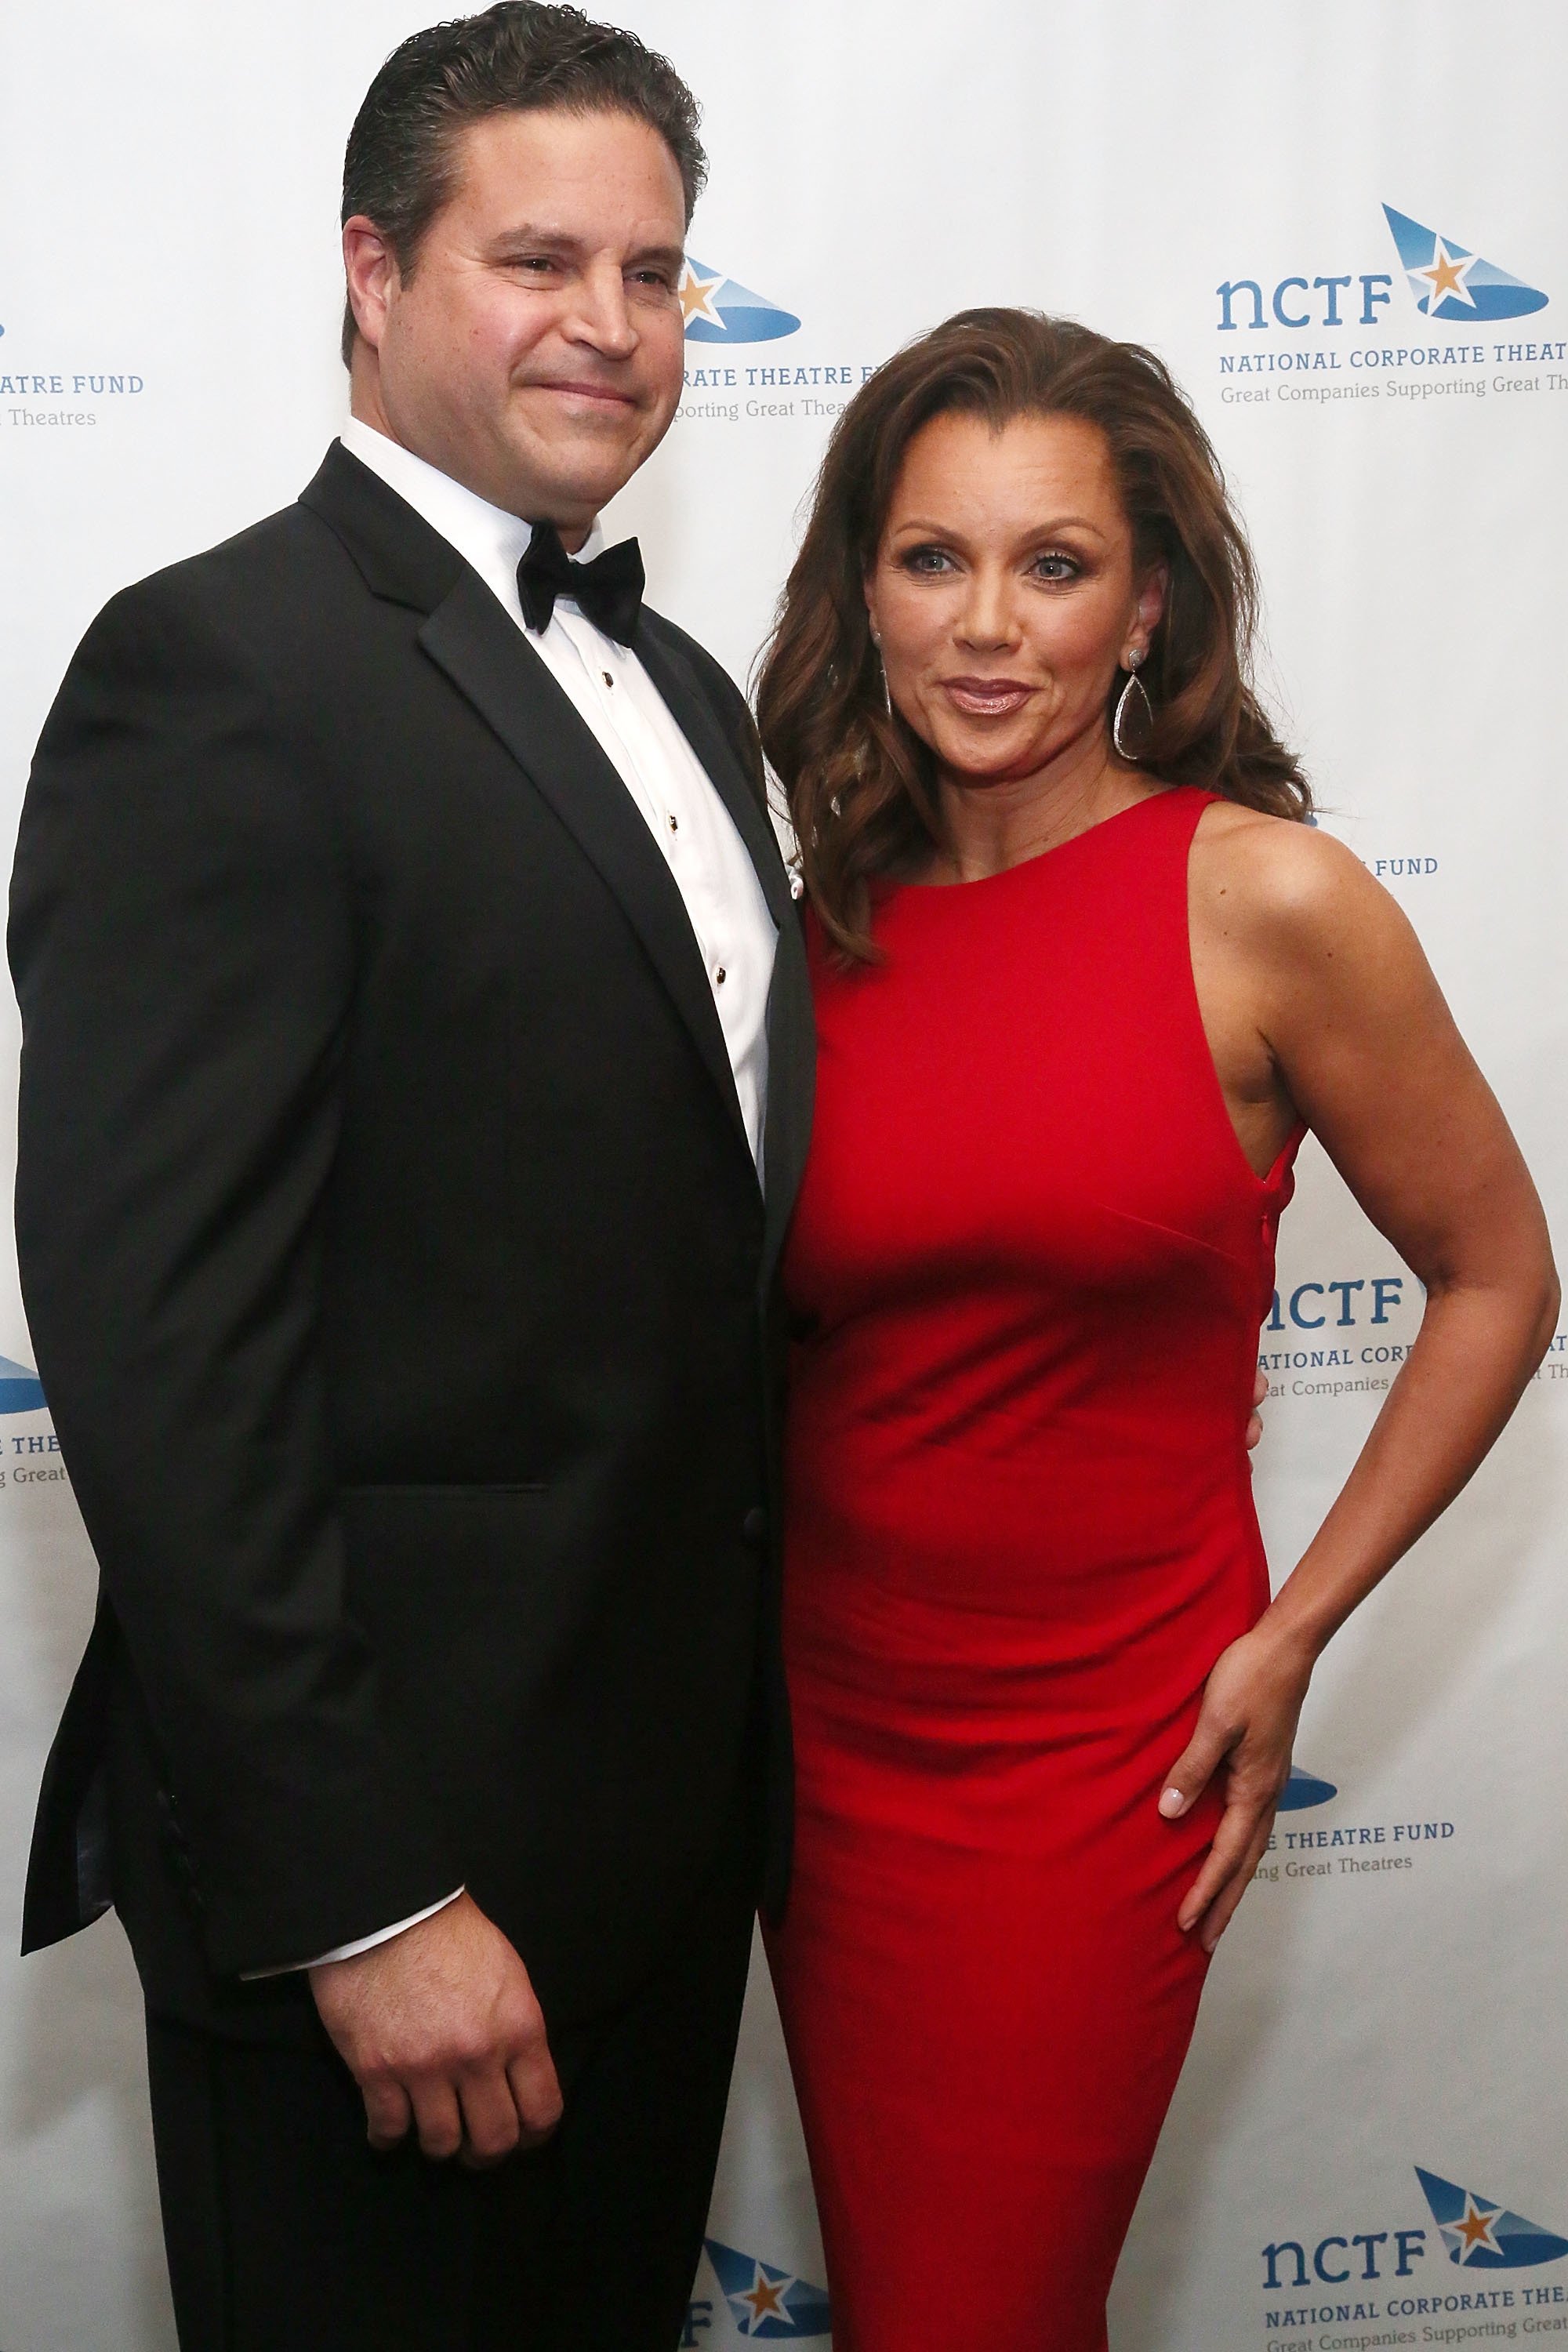 Vanessa Williams and husband Jim Skrip at the National Corporate Theatre Fund Chairman's Award Gala | Source: Getty Images